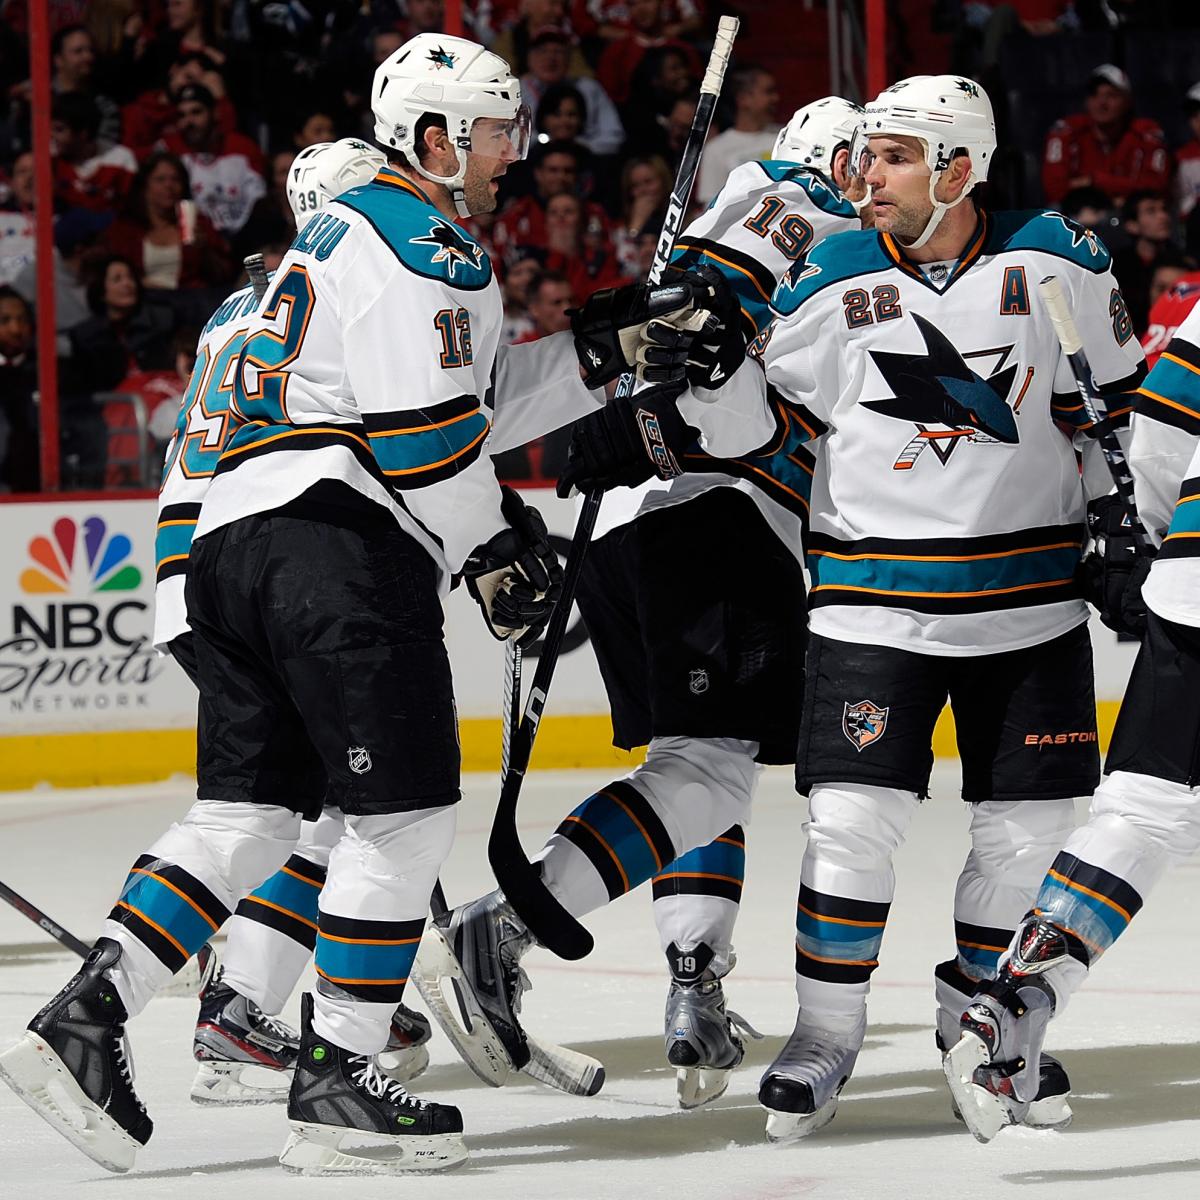 San Jose Sharks Is This Roster Strong Enough to Make Deep Cup Playoff